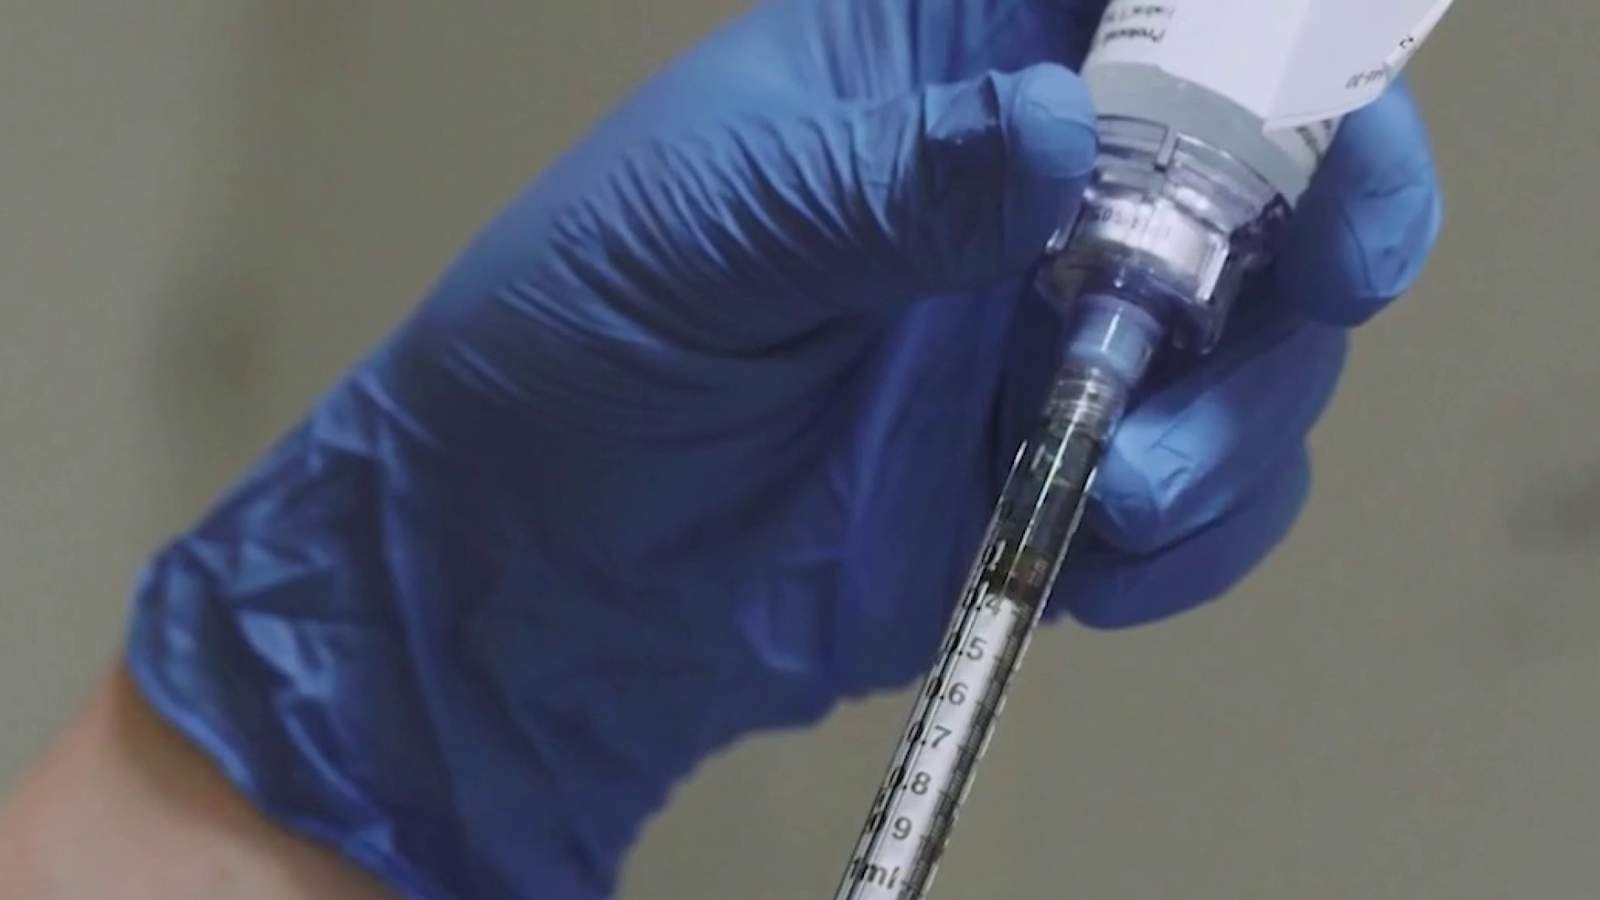 Vaccines mandatory for all Texas students, even those learning virtually